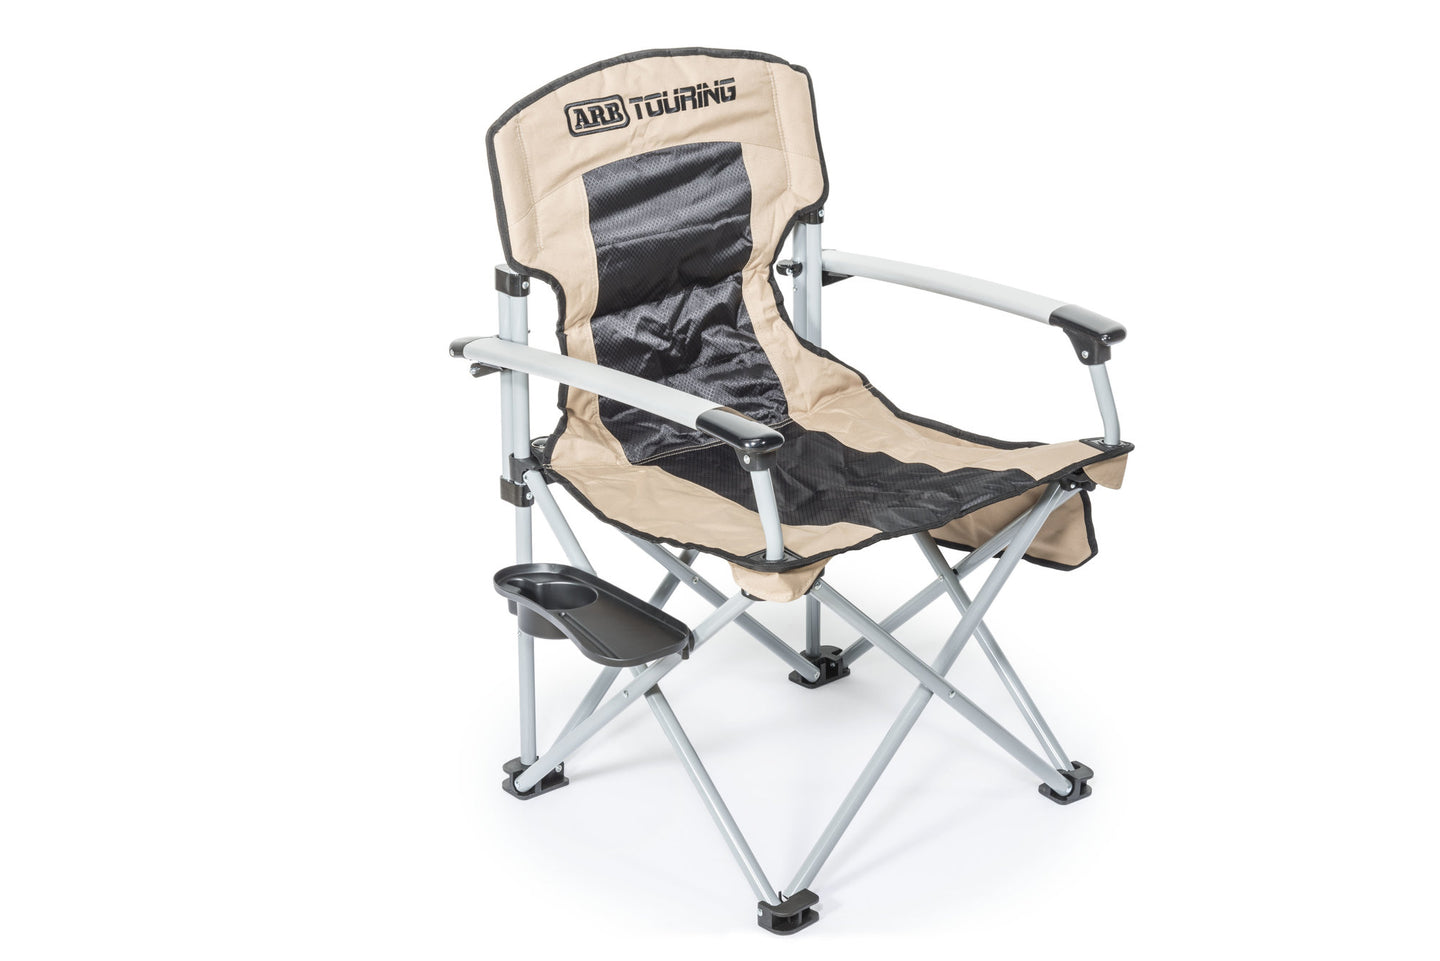 ARB Touring Camp Chair with Table